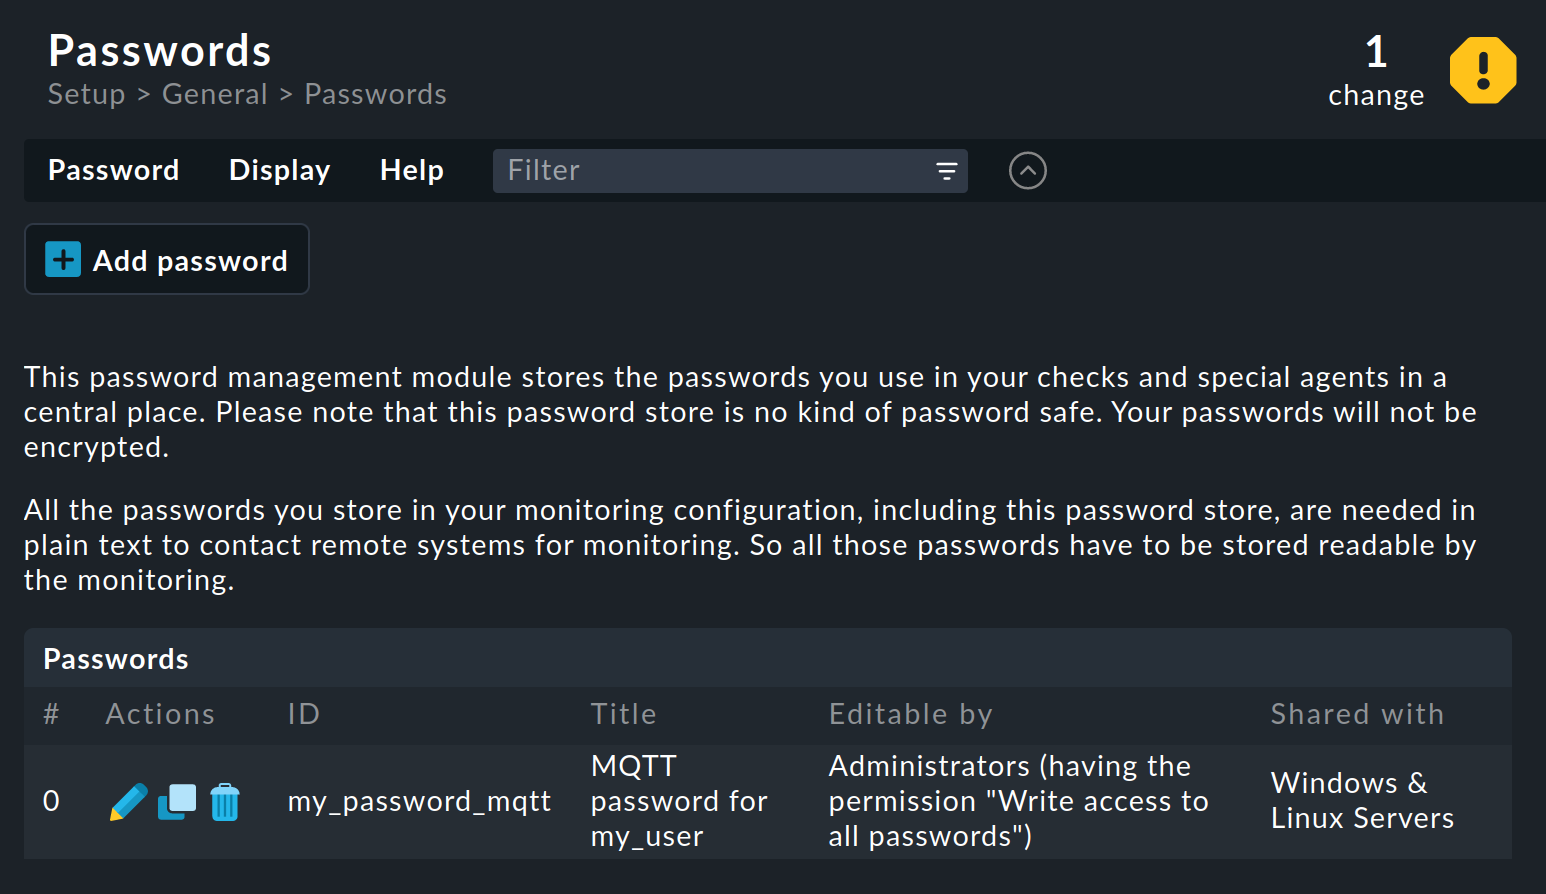 The password store overview page.